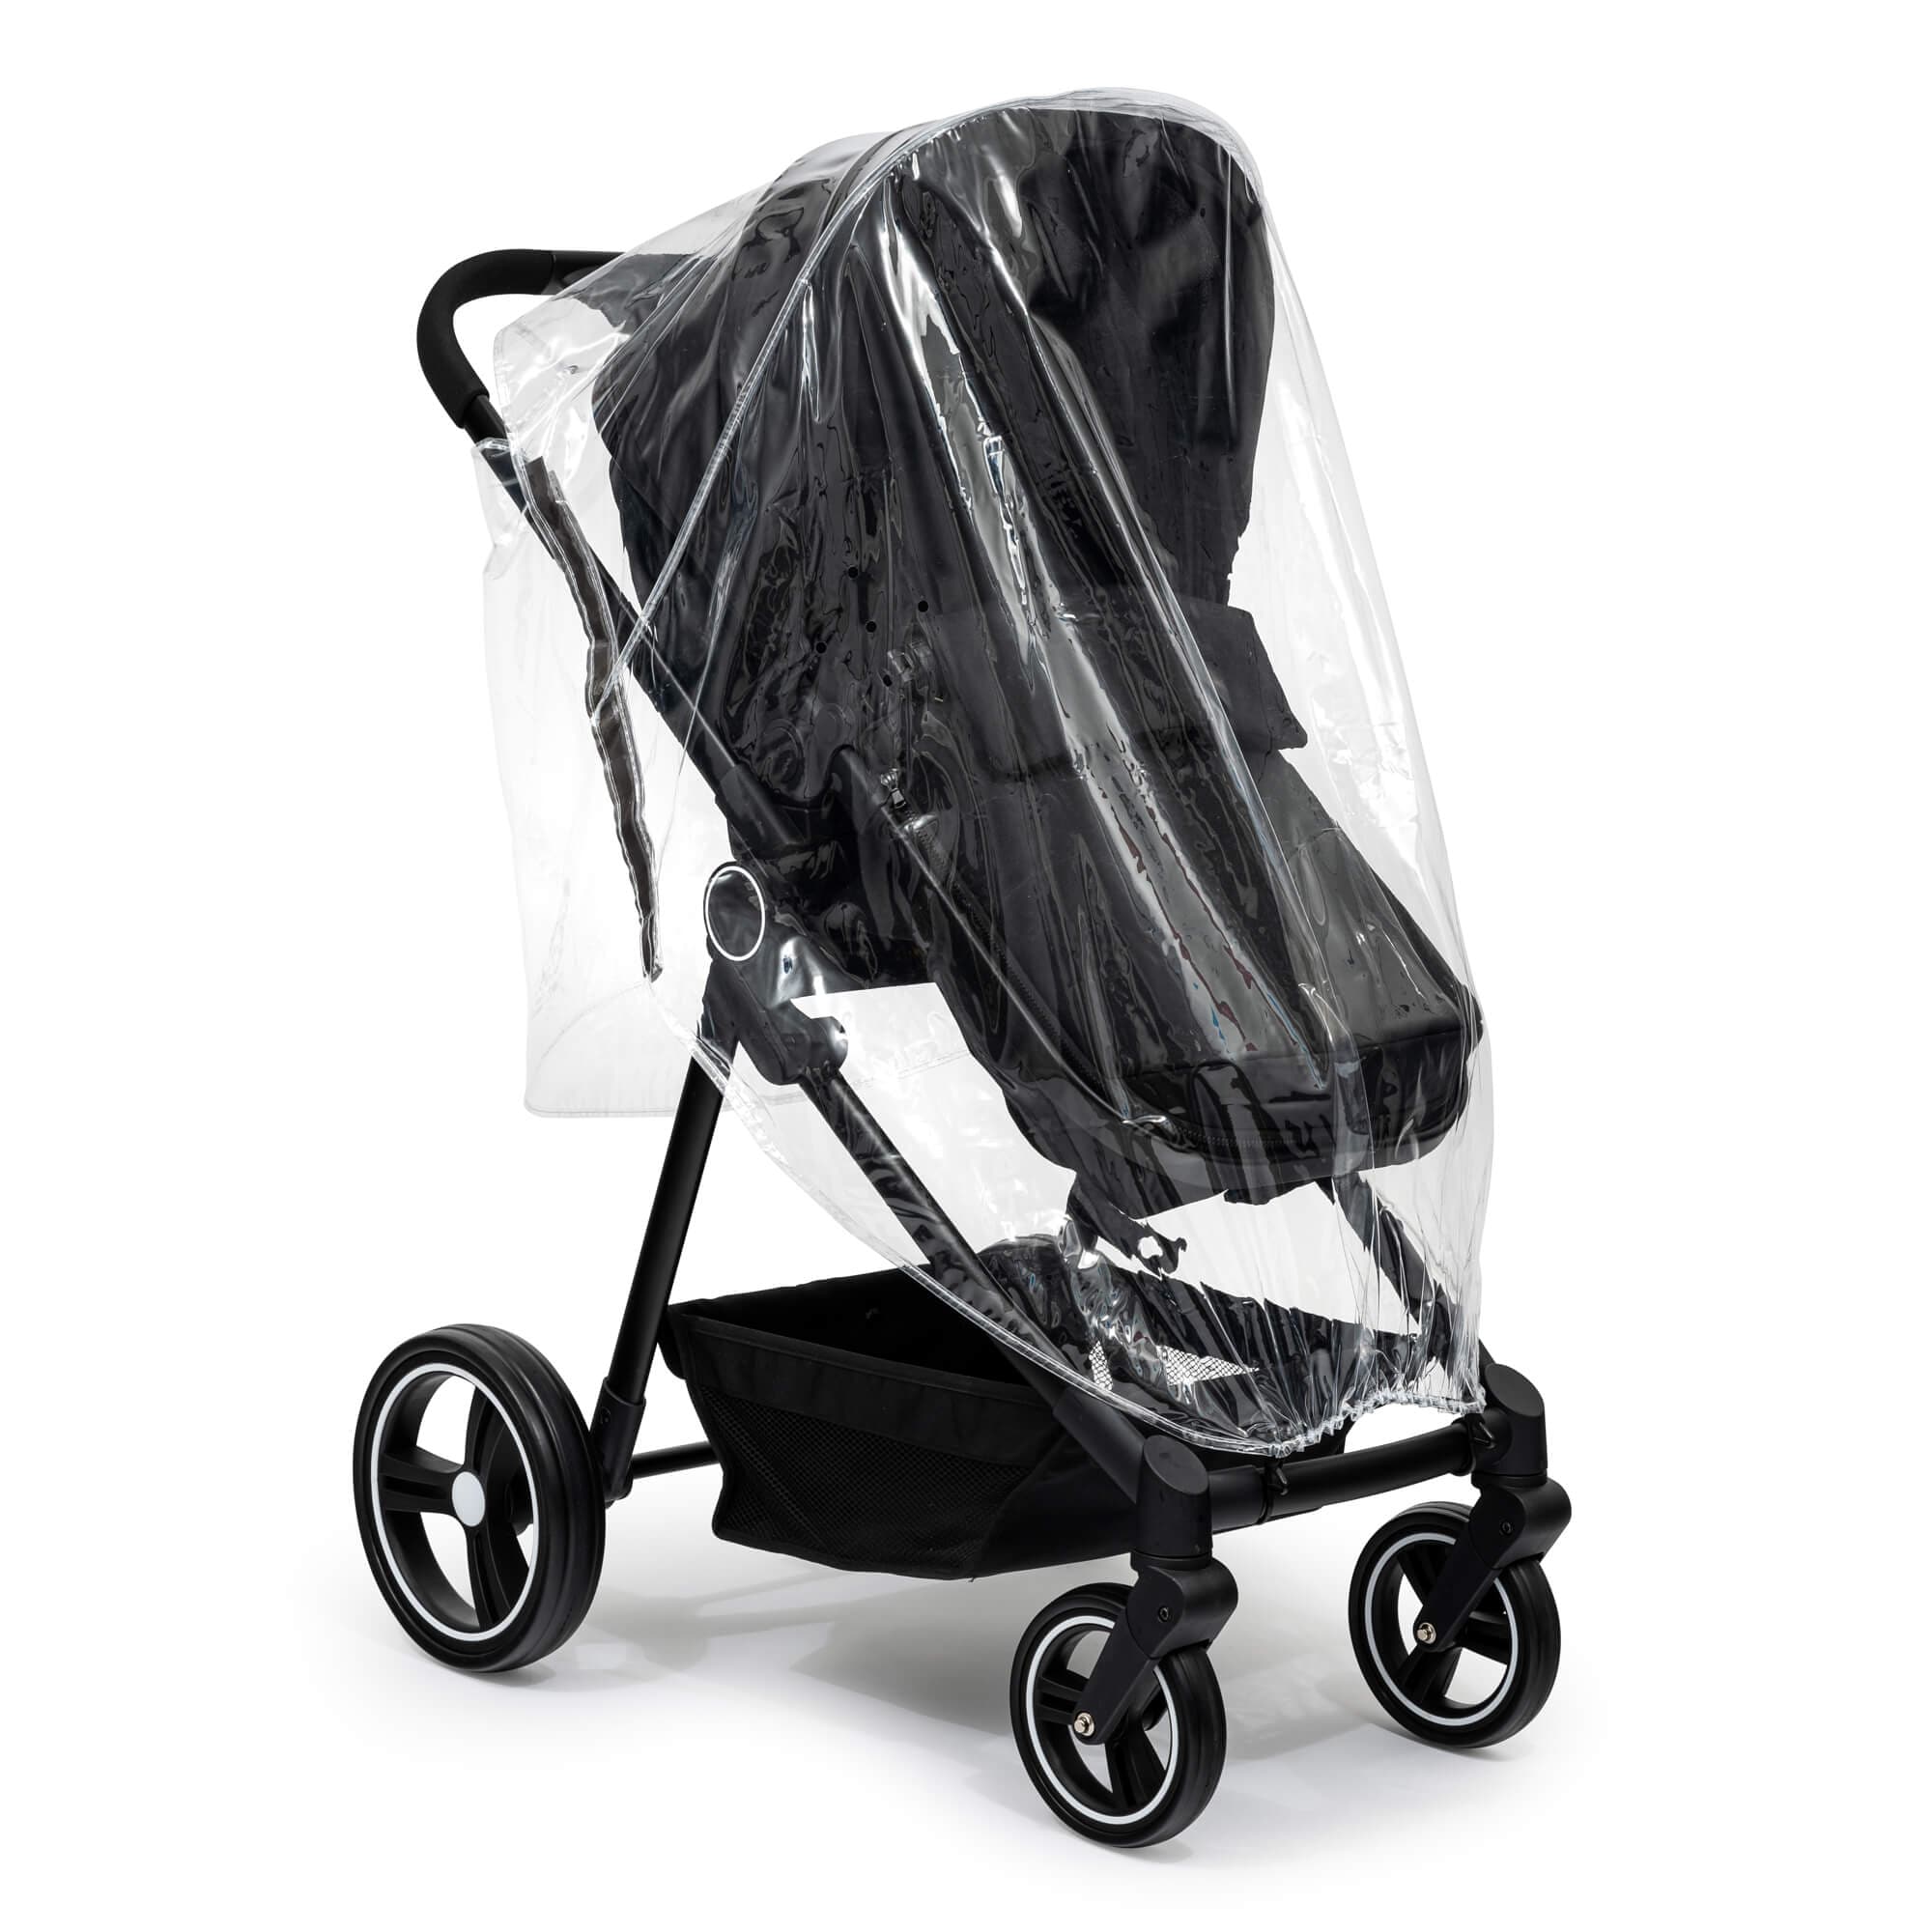 Pushchair Raincover Compatible With Maclaren - For Your Little One